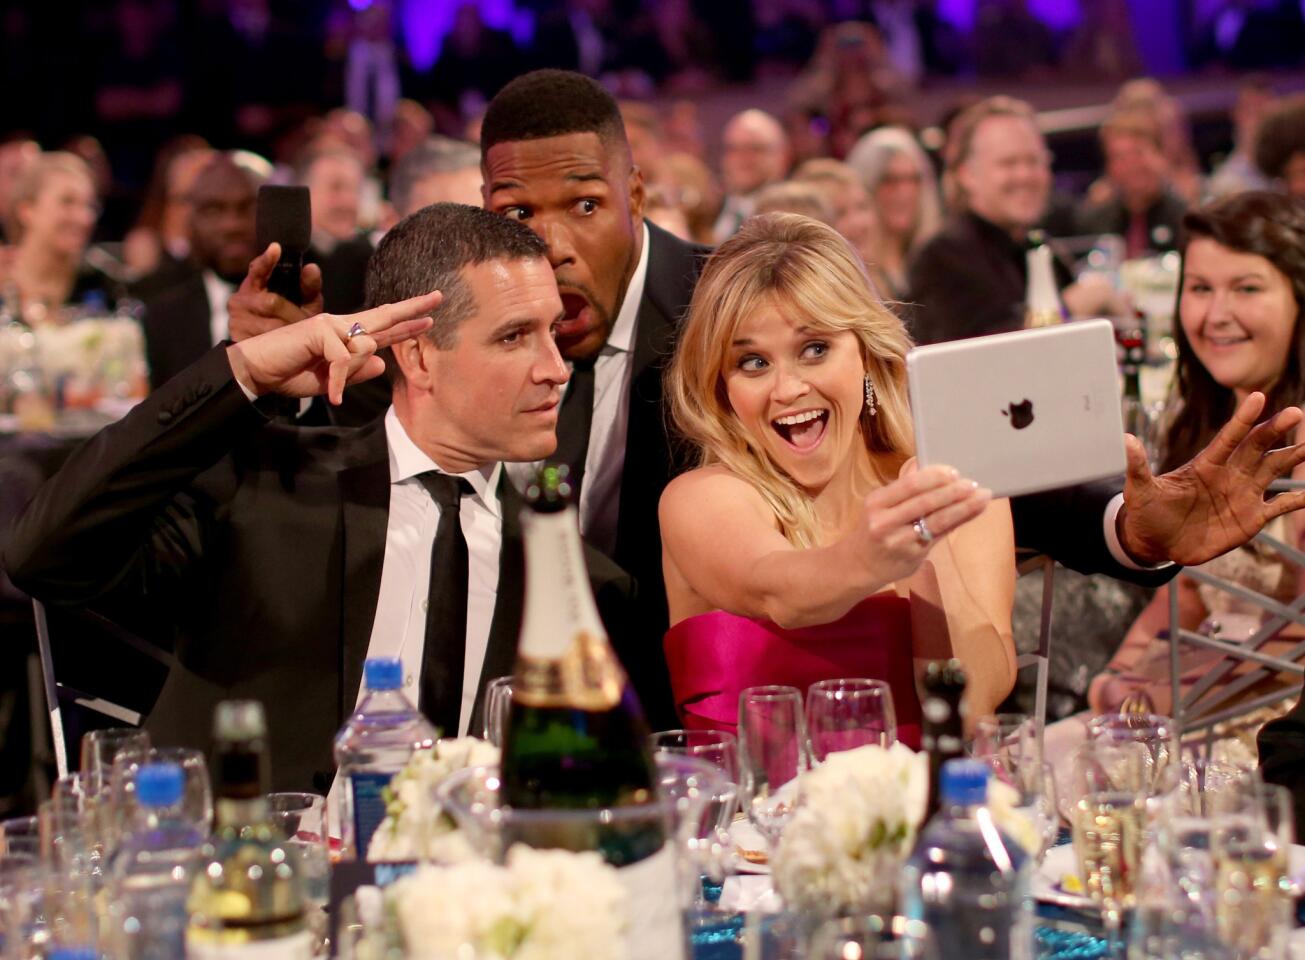 Actress Reese Witherspoon, with husband Jim Toth, left, and host Michael Strahan pose for selfies.